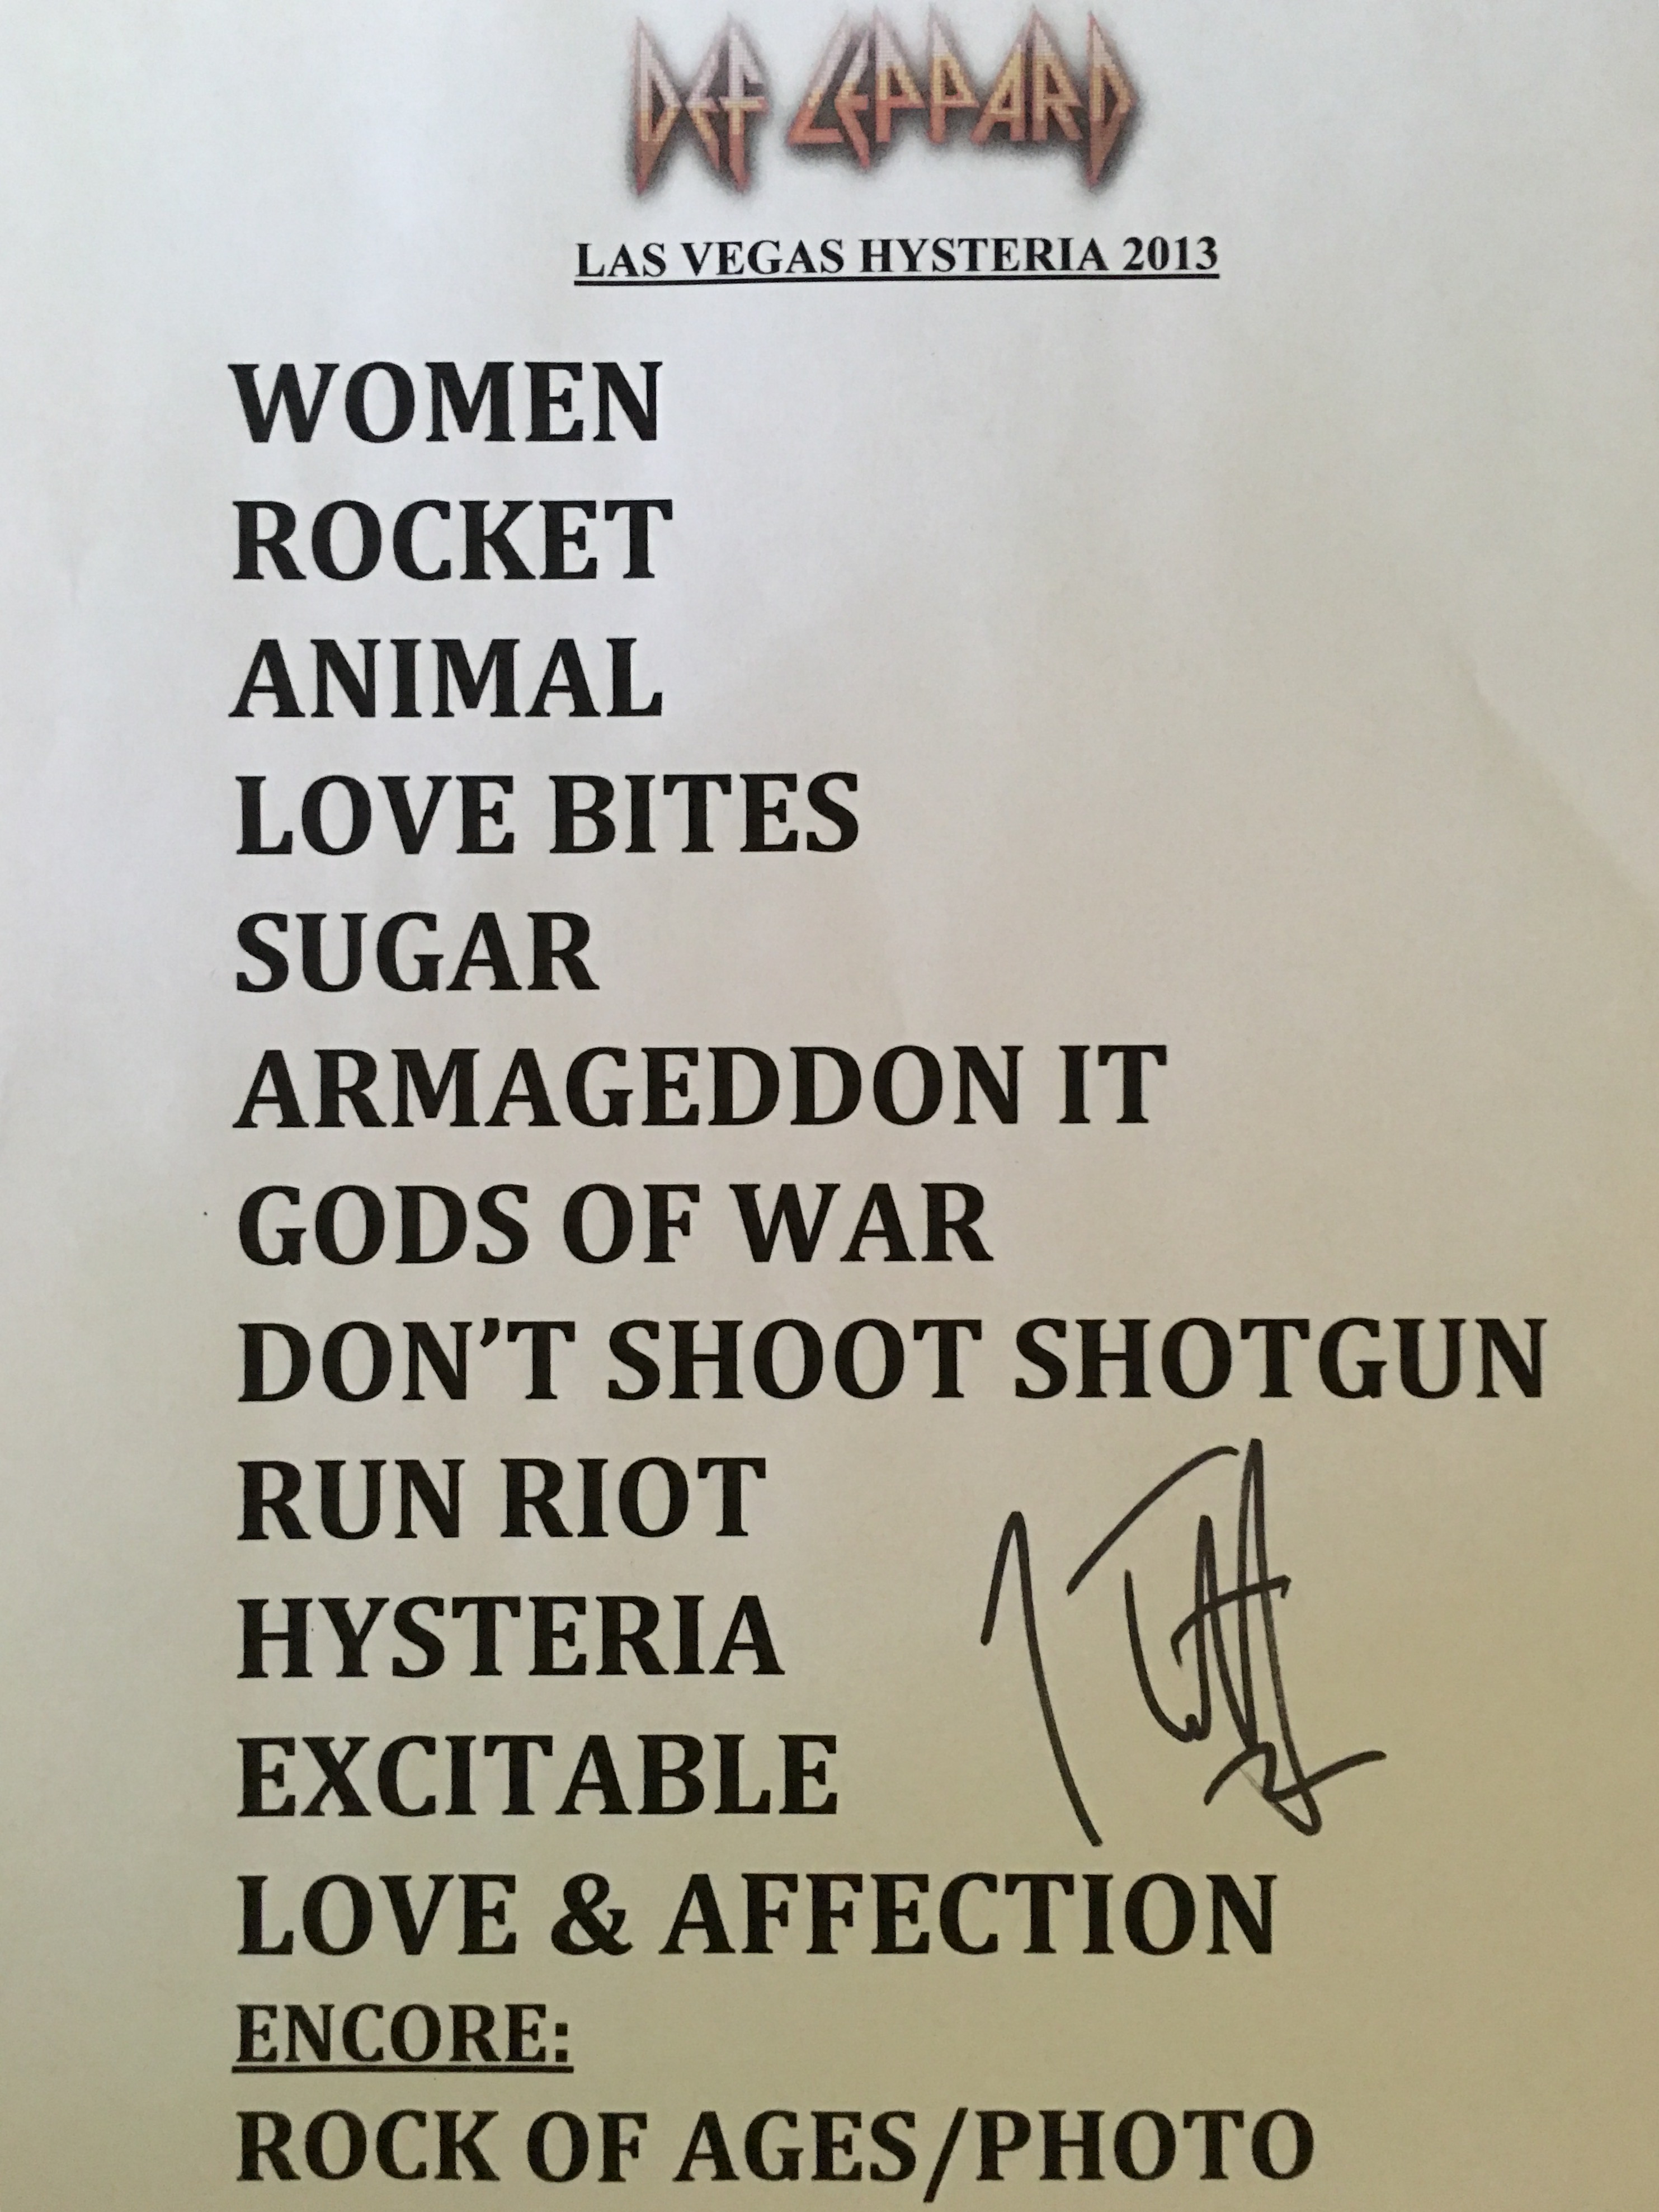 Here’s a chance to win an authentic original autographed setlist by Joe Elliott of Def Leppard from the 2013 Las Vegas, Viva! Hysteria shows